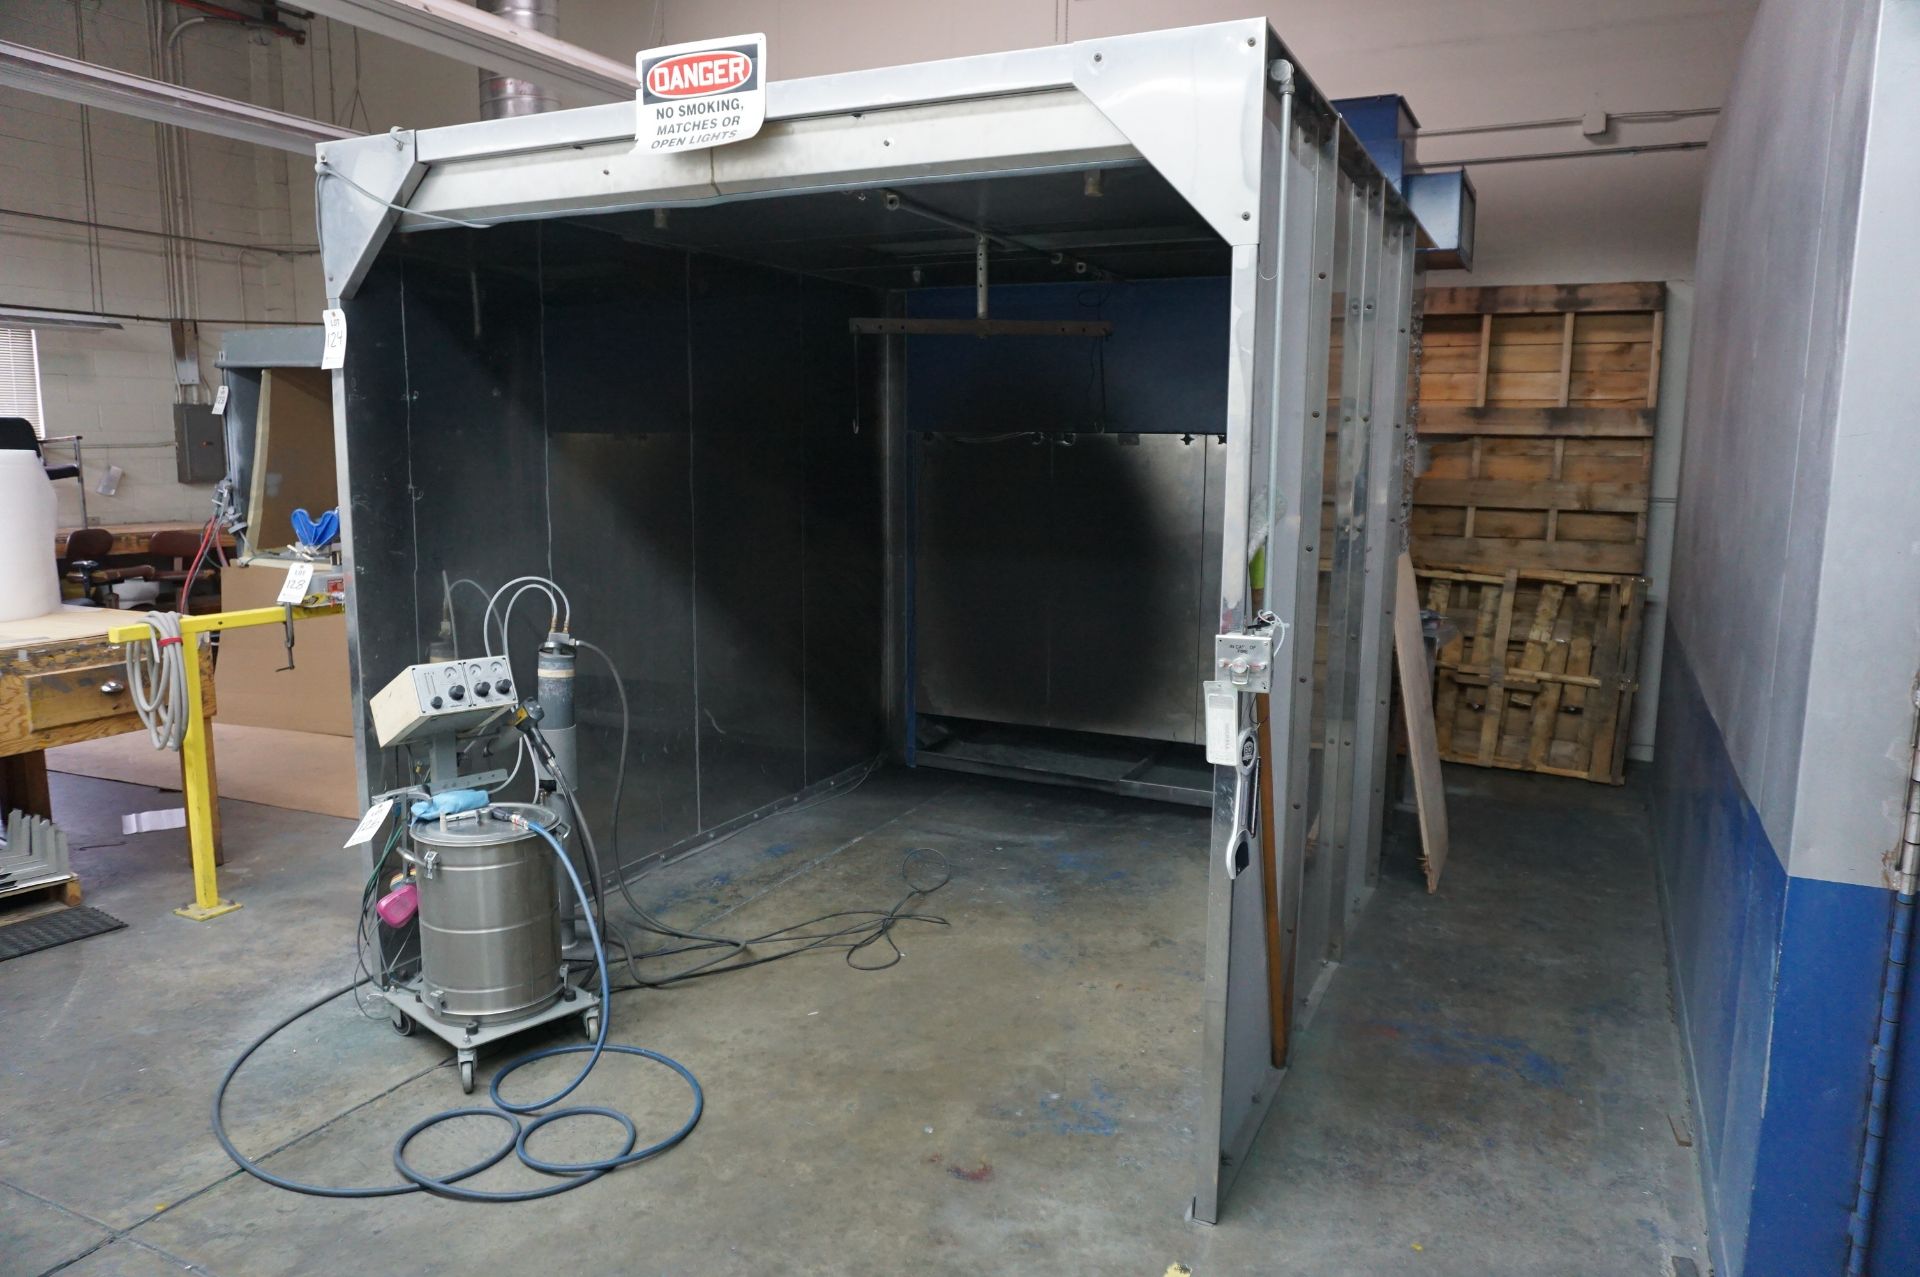 SPRAY BOOTH FOR POWDER COATING WITH EXHAUST AND FUME EXTRACTOR HOOD AND FILTER, RAMCO FINISHING